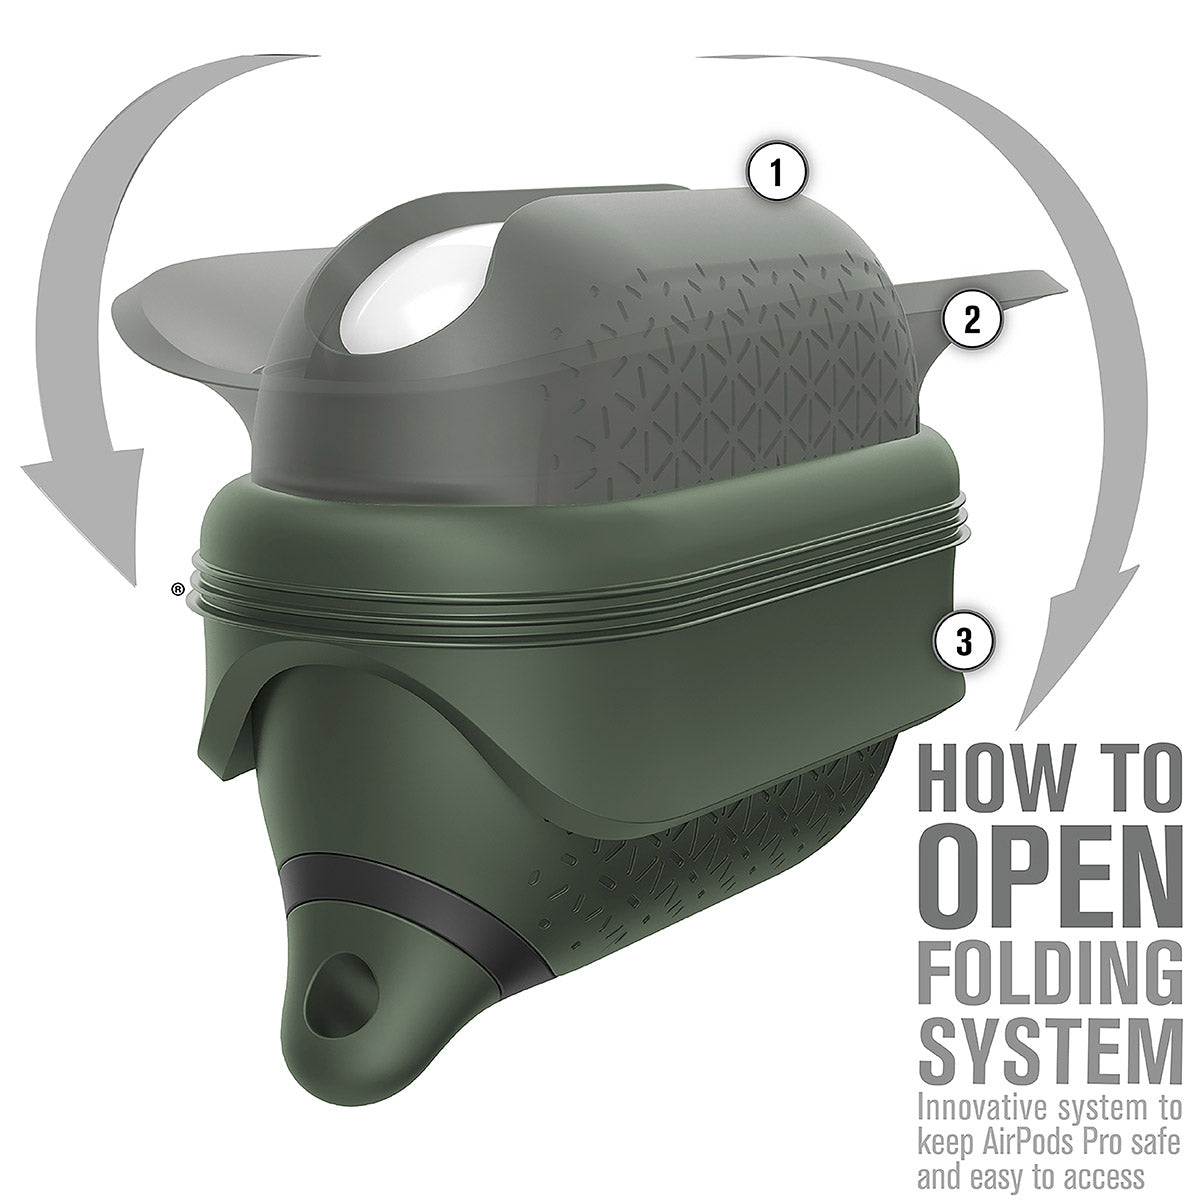 catalyst airpods pro gen 2 1 waterproof case carabiner premium edition army green with arrows on how to open the case text reads how to open folding system innovative system to keep airpods pro safe and easy to access